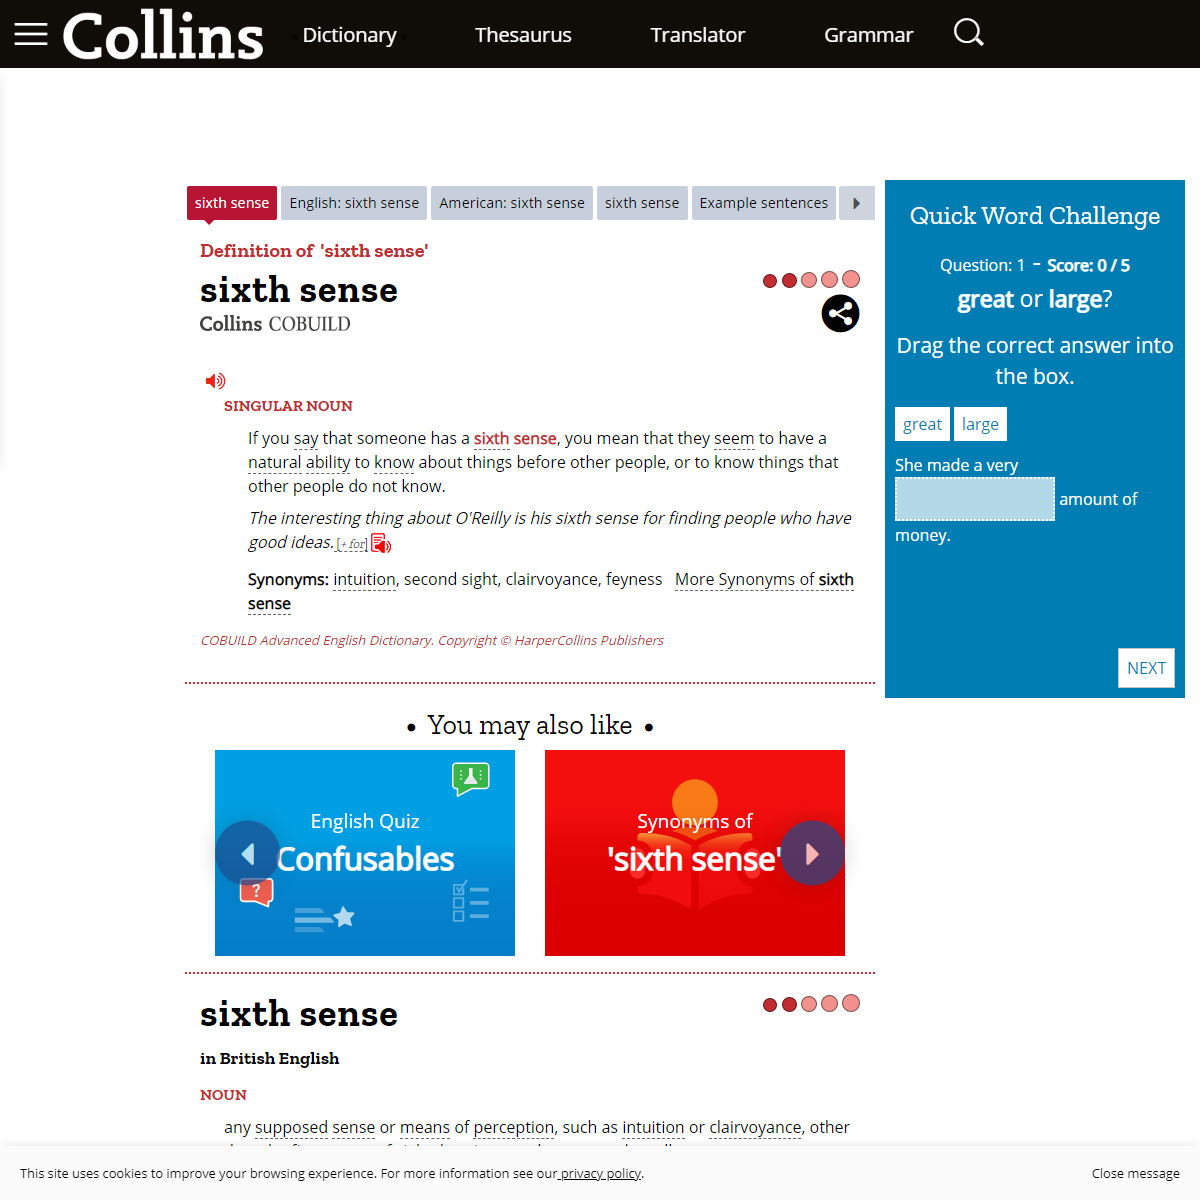 A complete backup of https://www.collinsdictionary.com/dictionary/english/sixth-sense